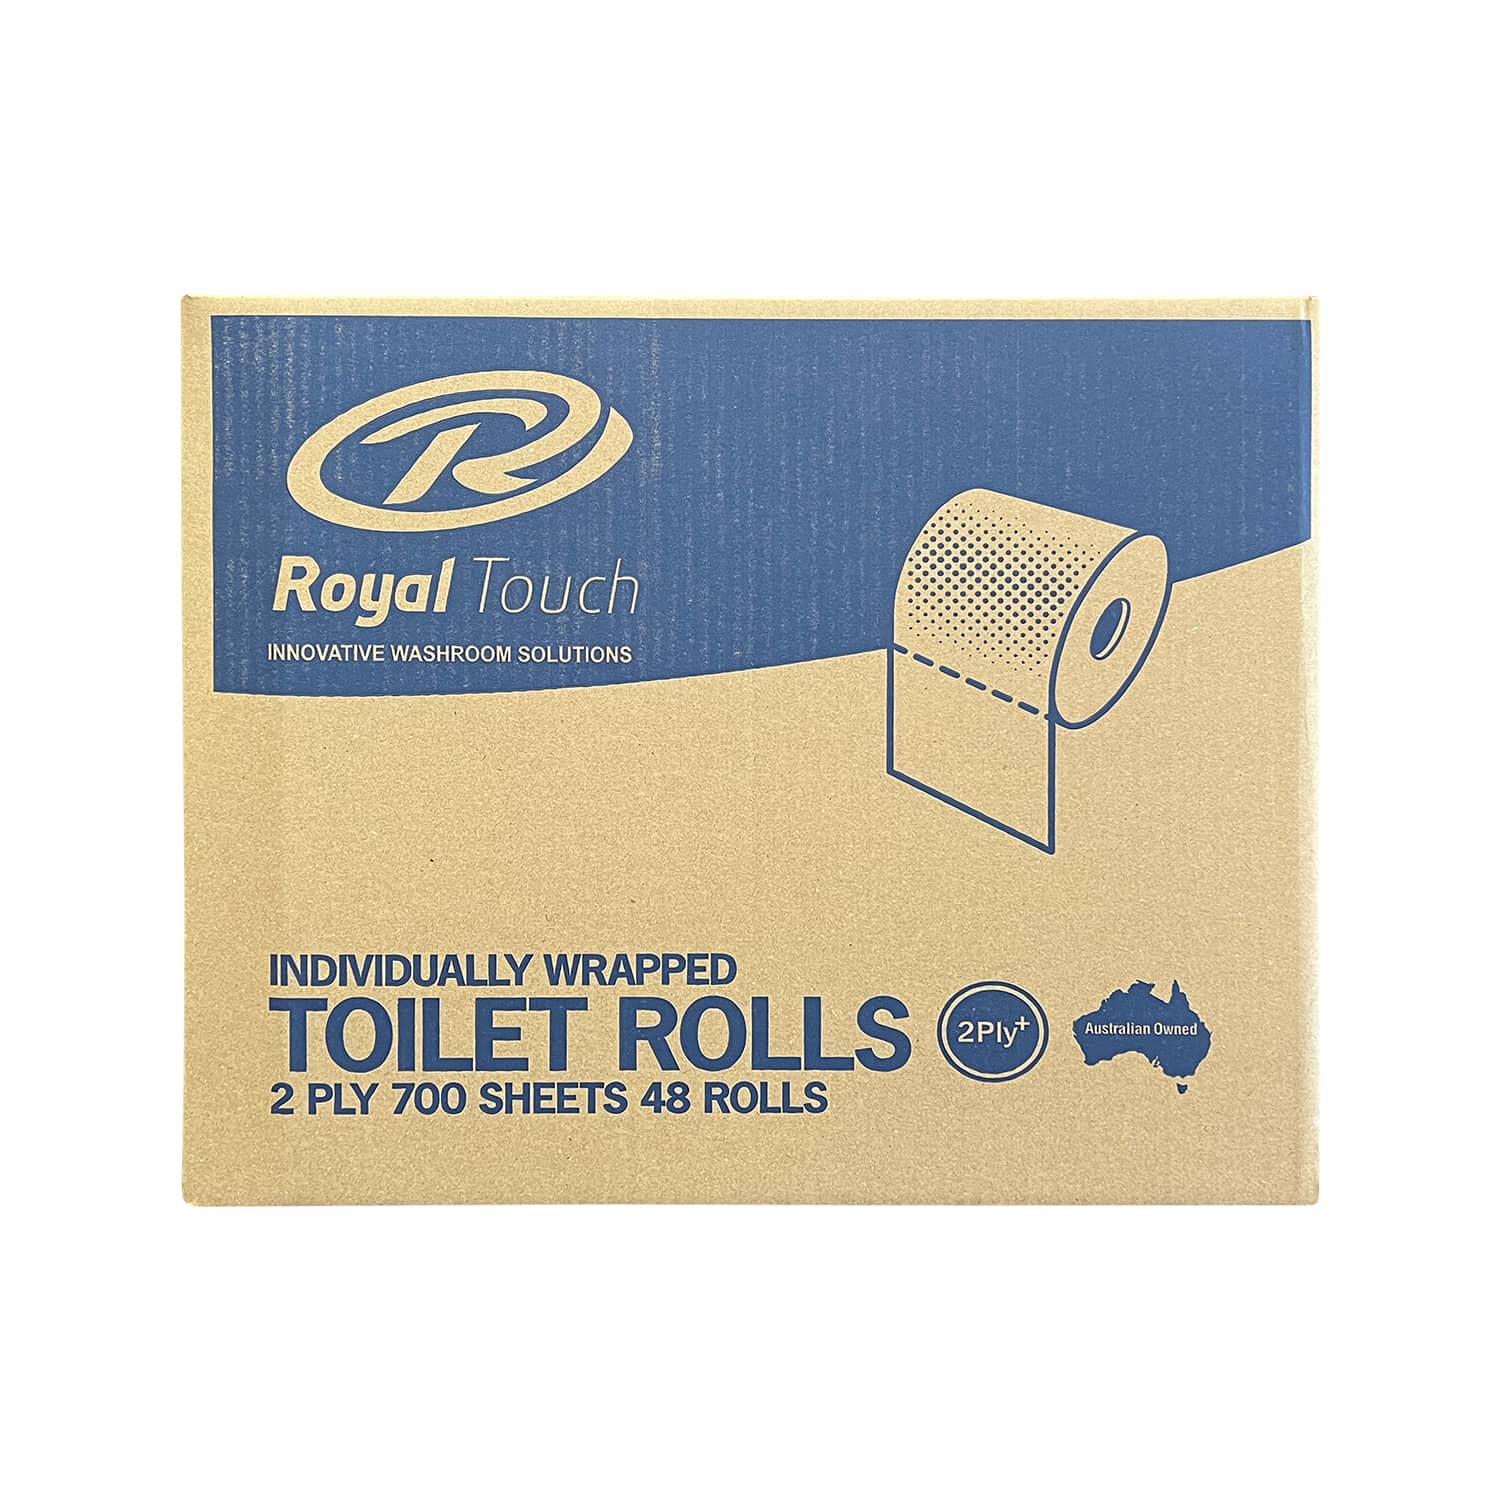 Carton Of Individually Wrapped 2Ply 700 Sheet Toilet Rolls